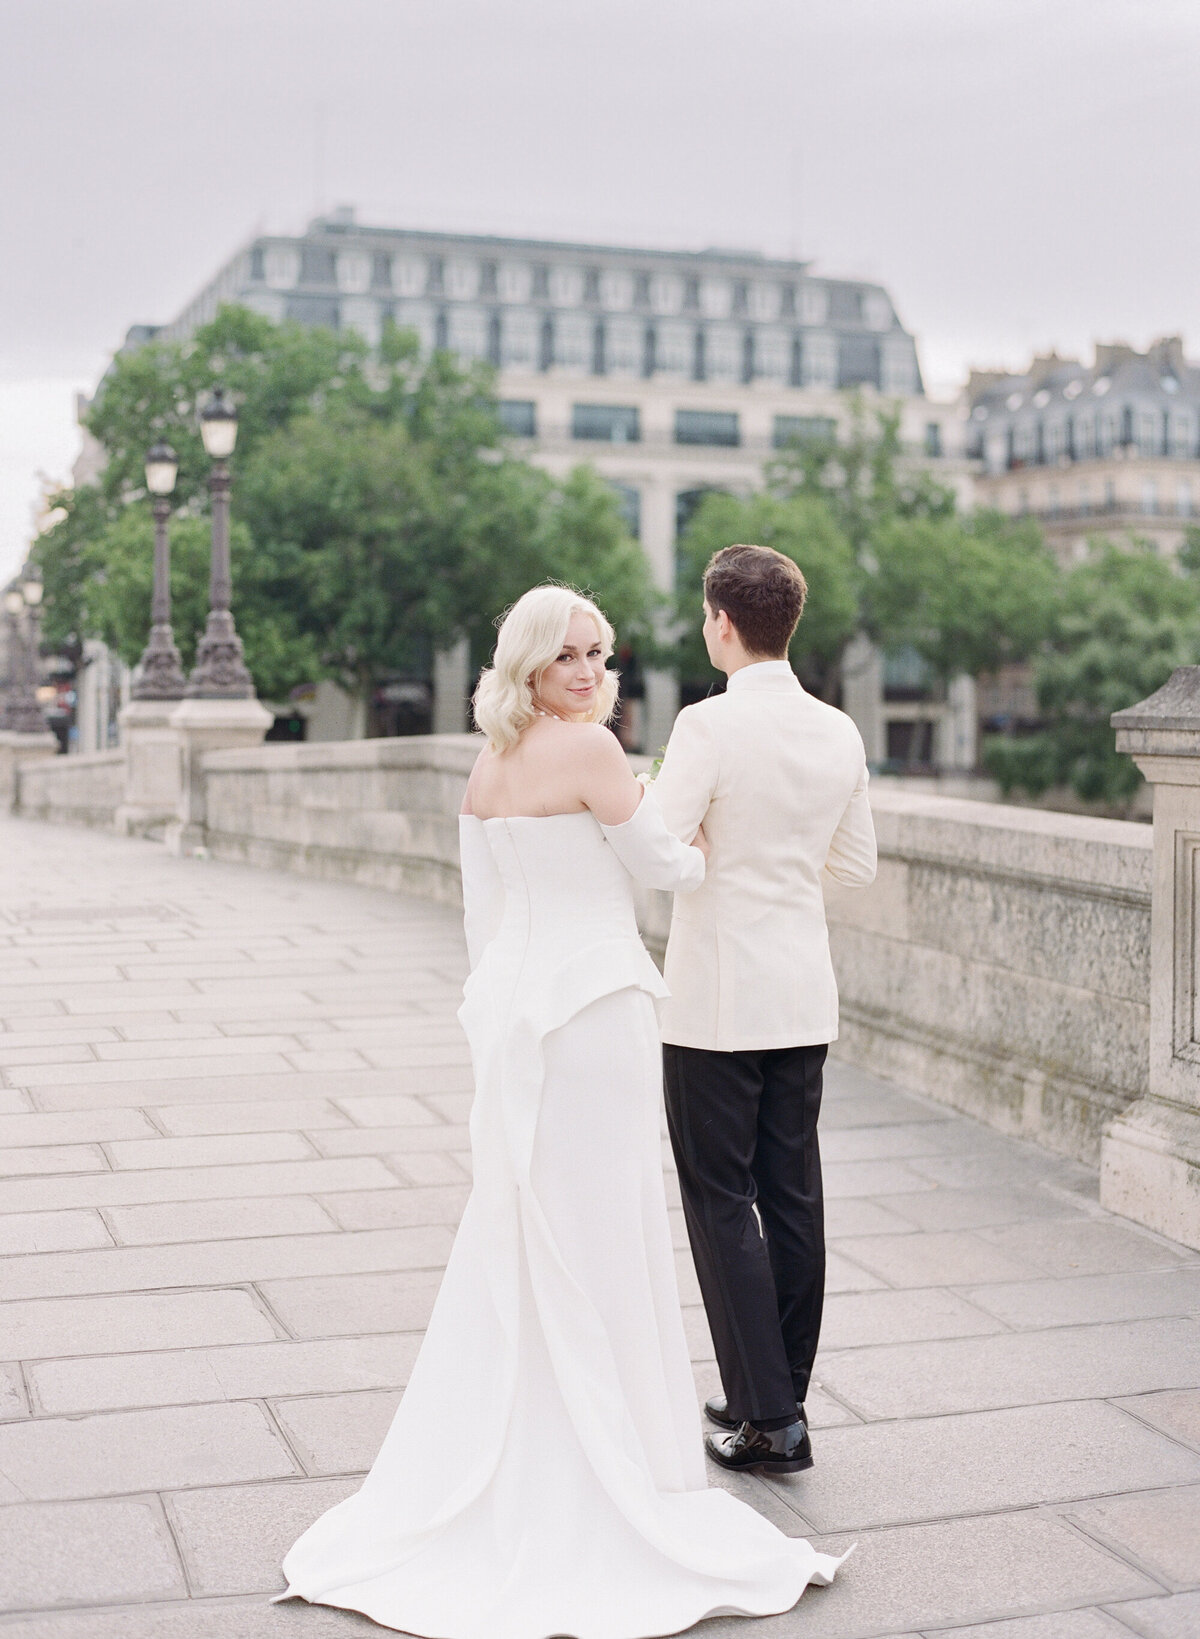 Jennifer Fox Weddings English speaking wedding planning & design agency in France crafting refined and bespoke weddings and celebrations Provence, Paris and destination Laurel-Chris-Chateau-de-Champlatreaux-Molly-Carr-Photography-5